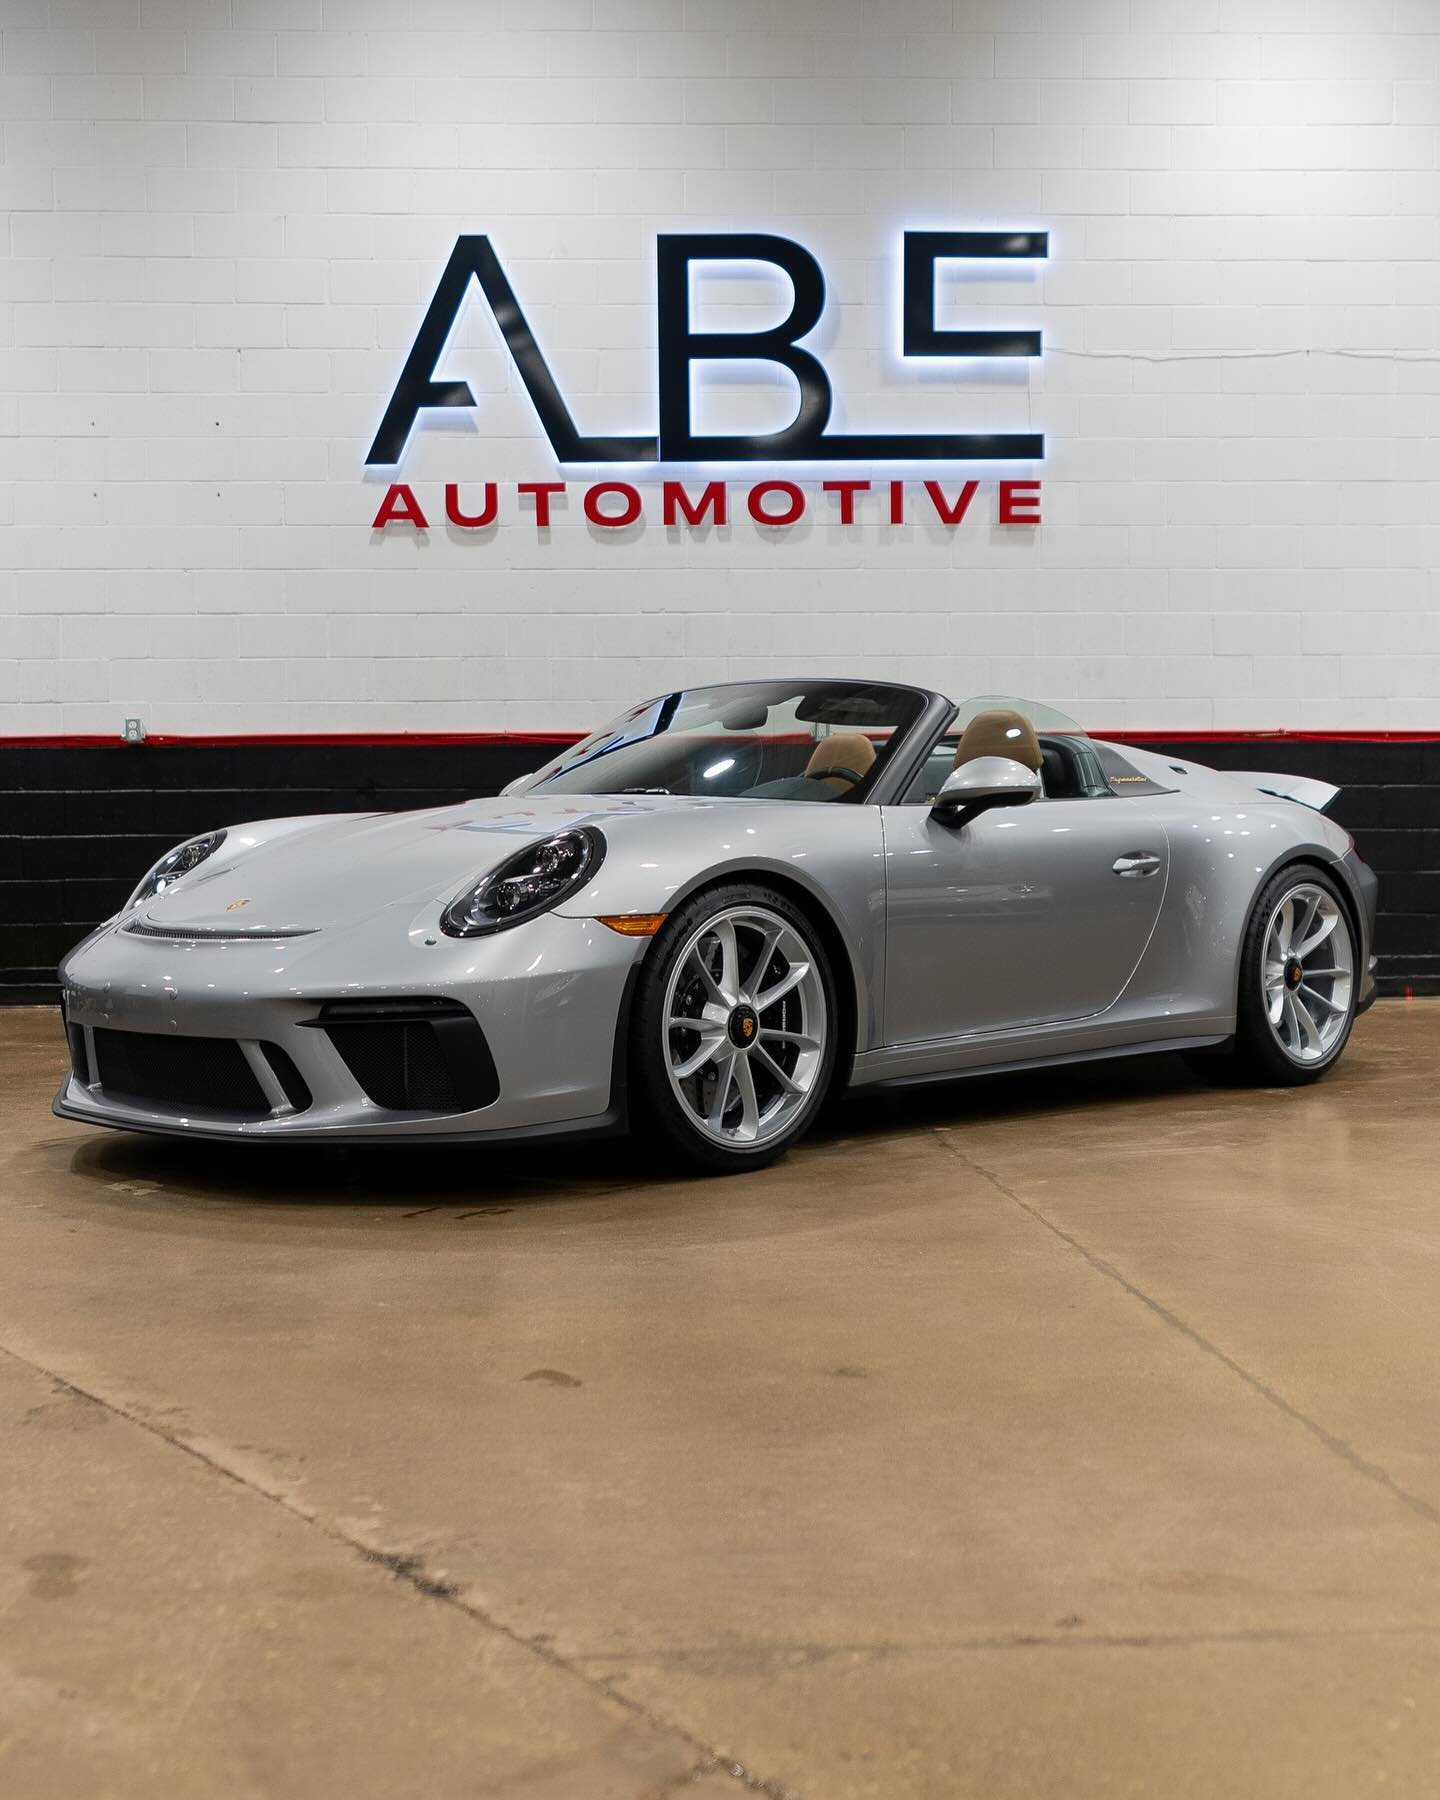 1 of 1948 🔥 As part of Porsche&rsquo;s 70th year anniversary, this limited edition 911 Speedster released in 2018 is a stunning collectible which deserves to be protected. We completed full body paint protection film on the vehicle and ceramic coate